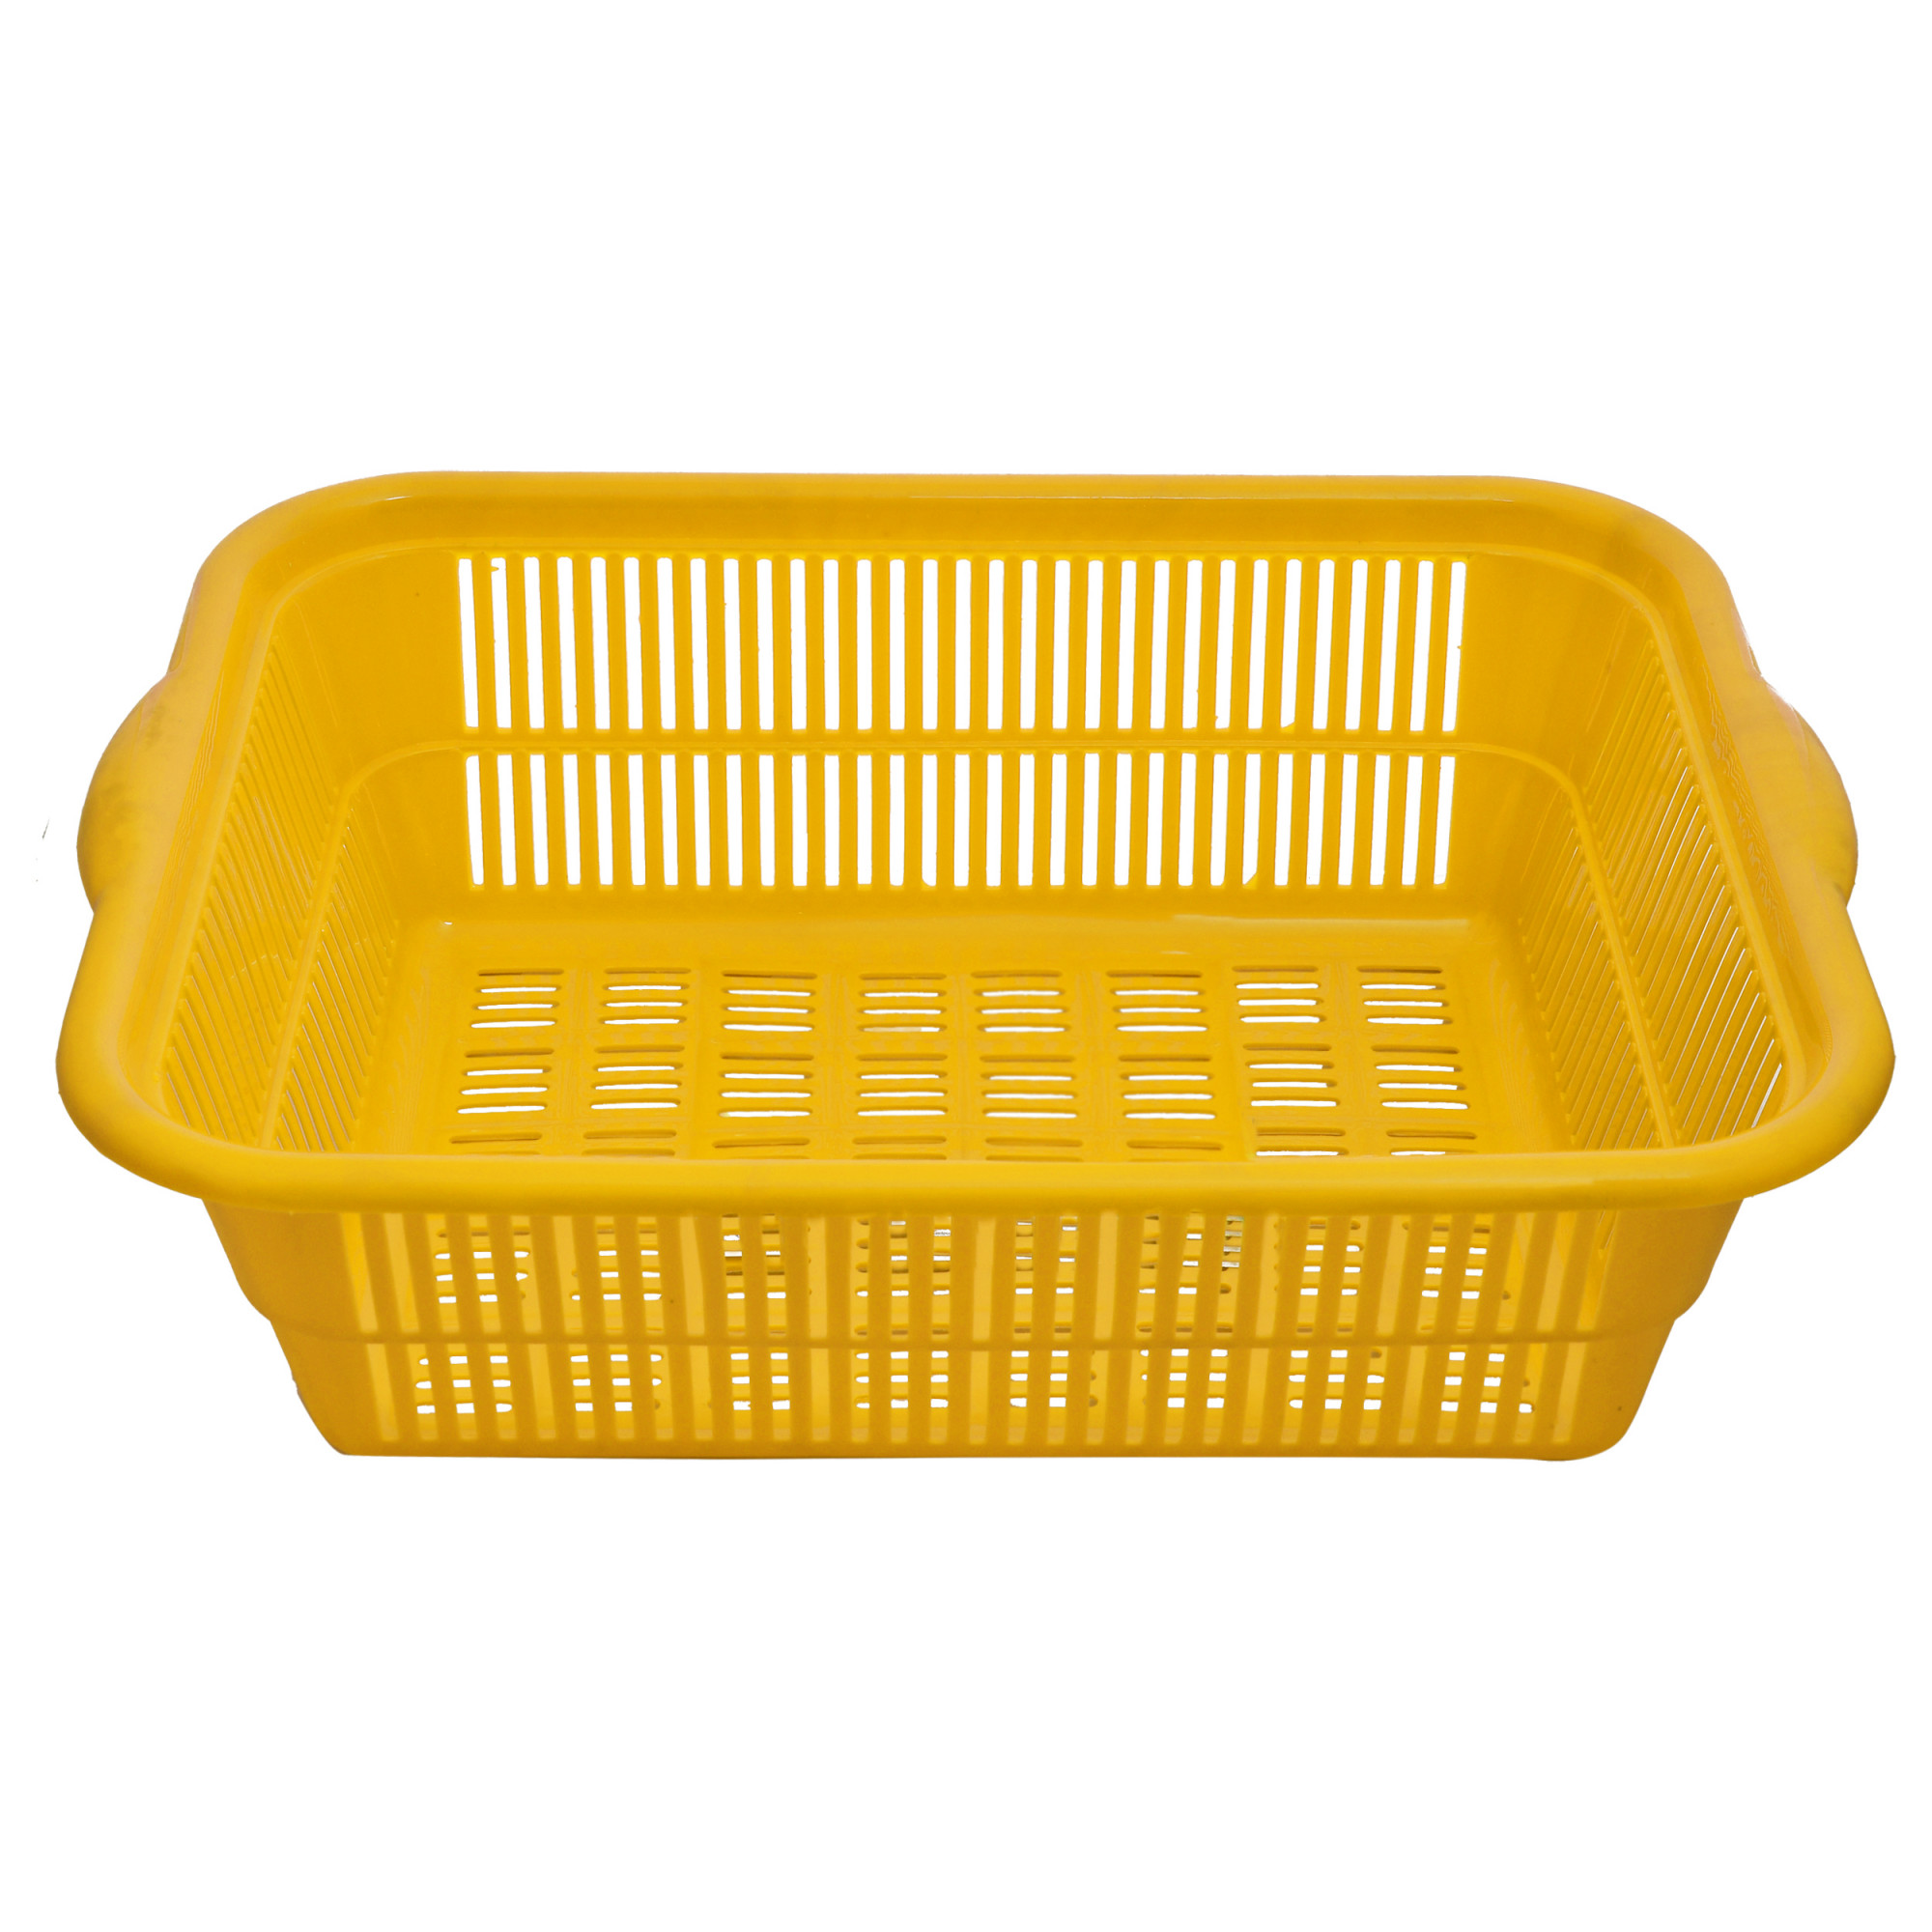 Kuber Industries Plastic Kitchen Dish Rack Drainer Vegetables And Fruits Basket Dish Rack Multipurpose Organizers ,Small Size,Red & Yellow